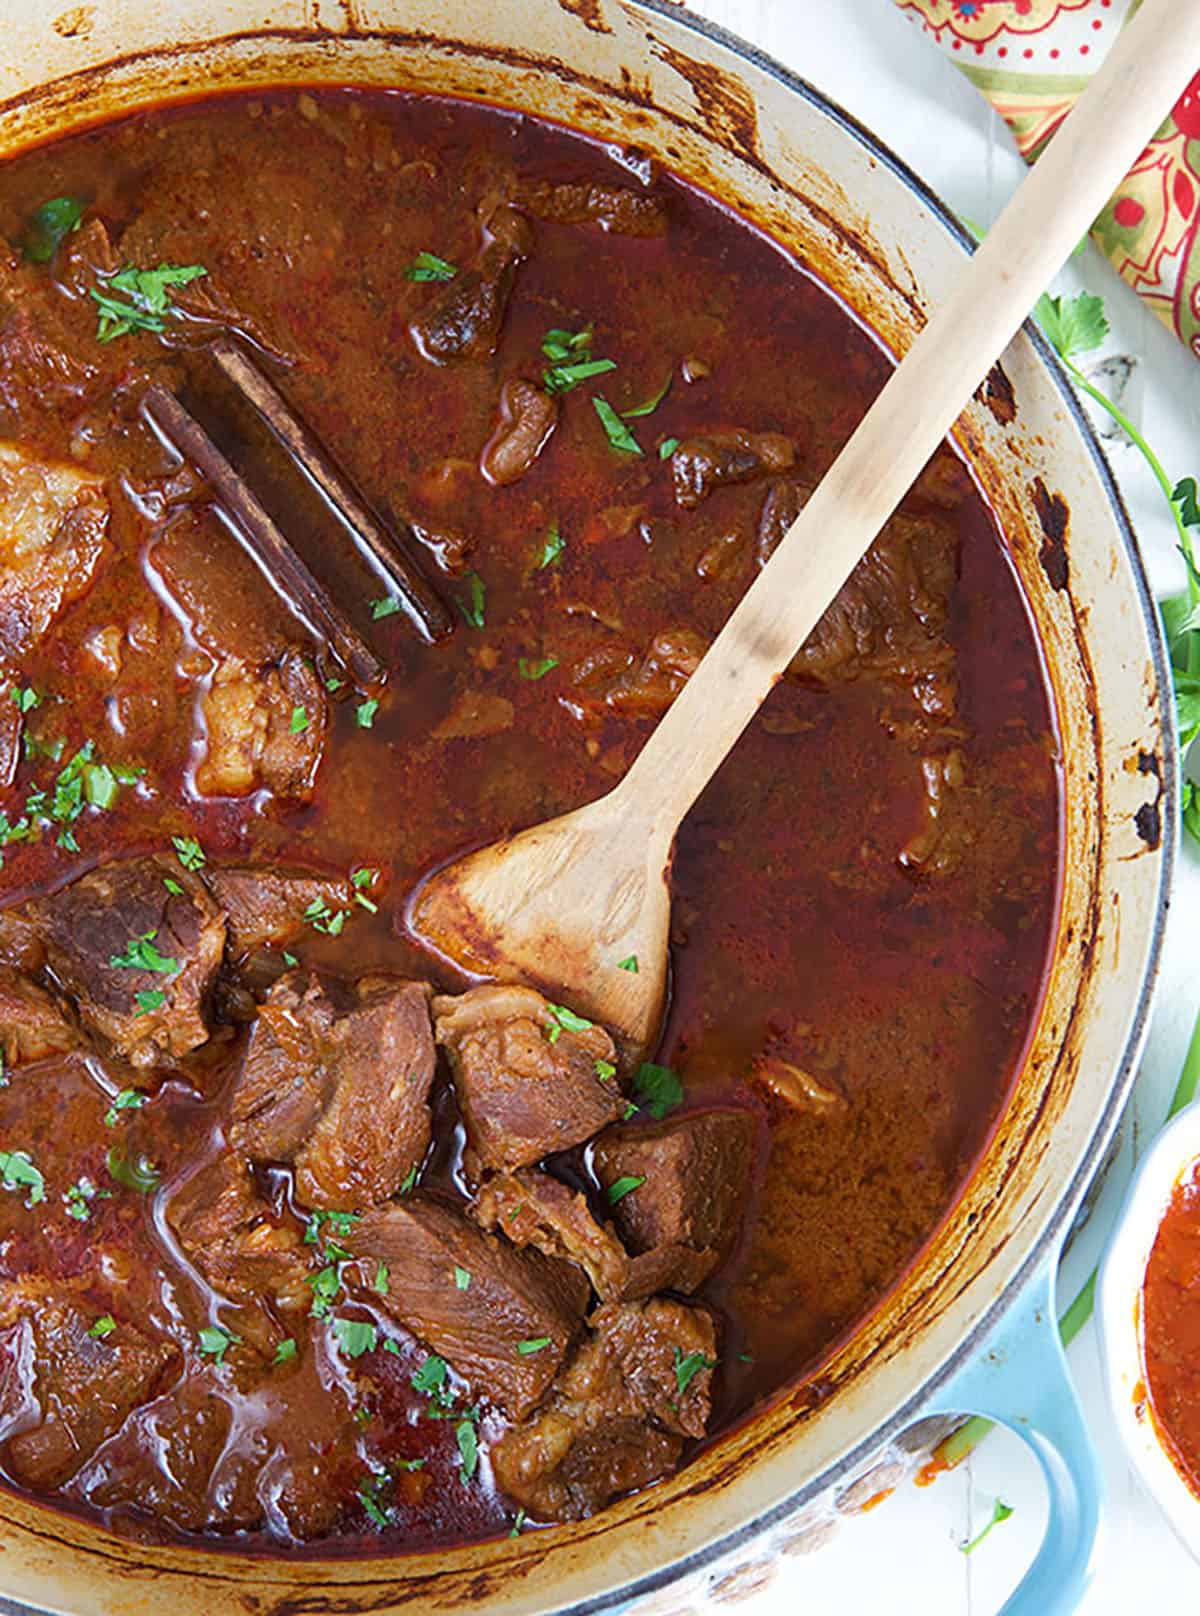 Birria Stew in a large blue pot with a wooden spoon.